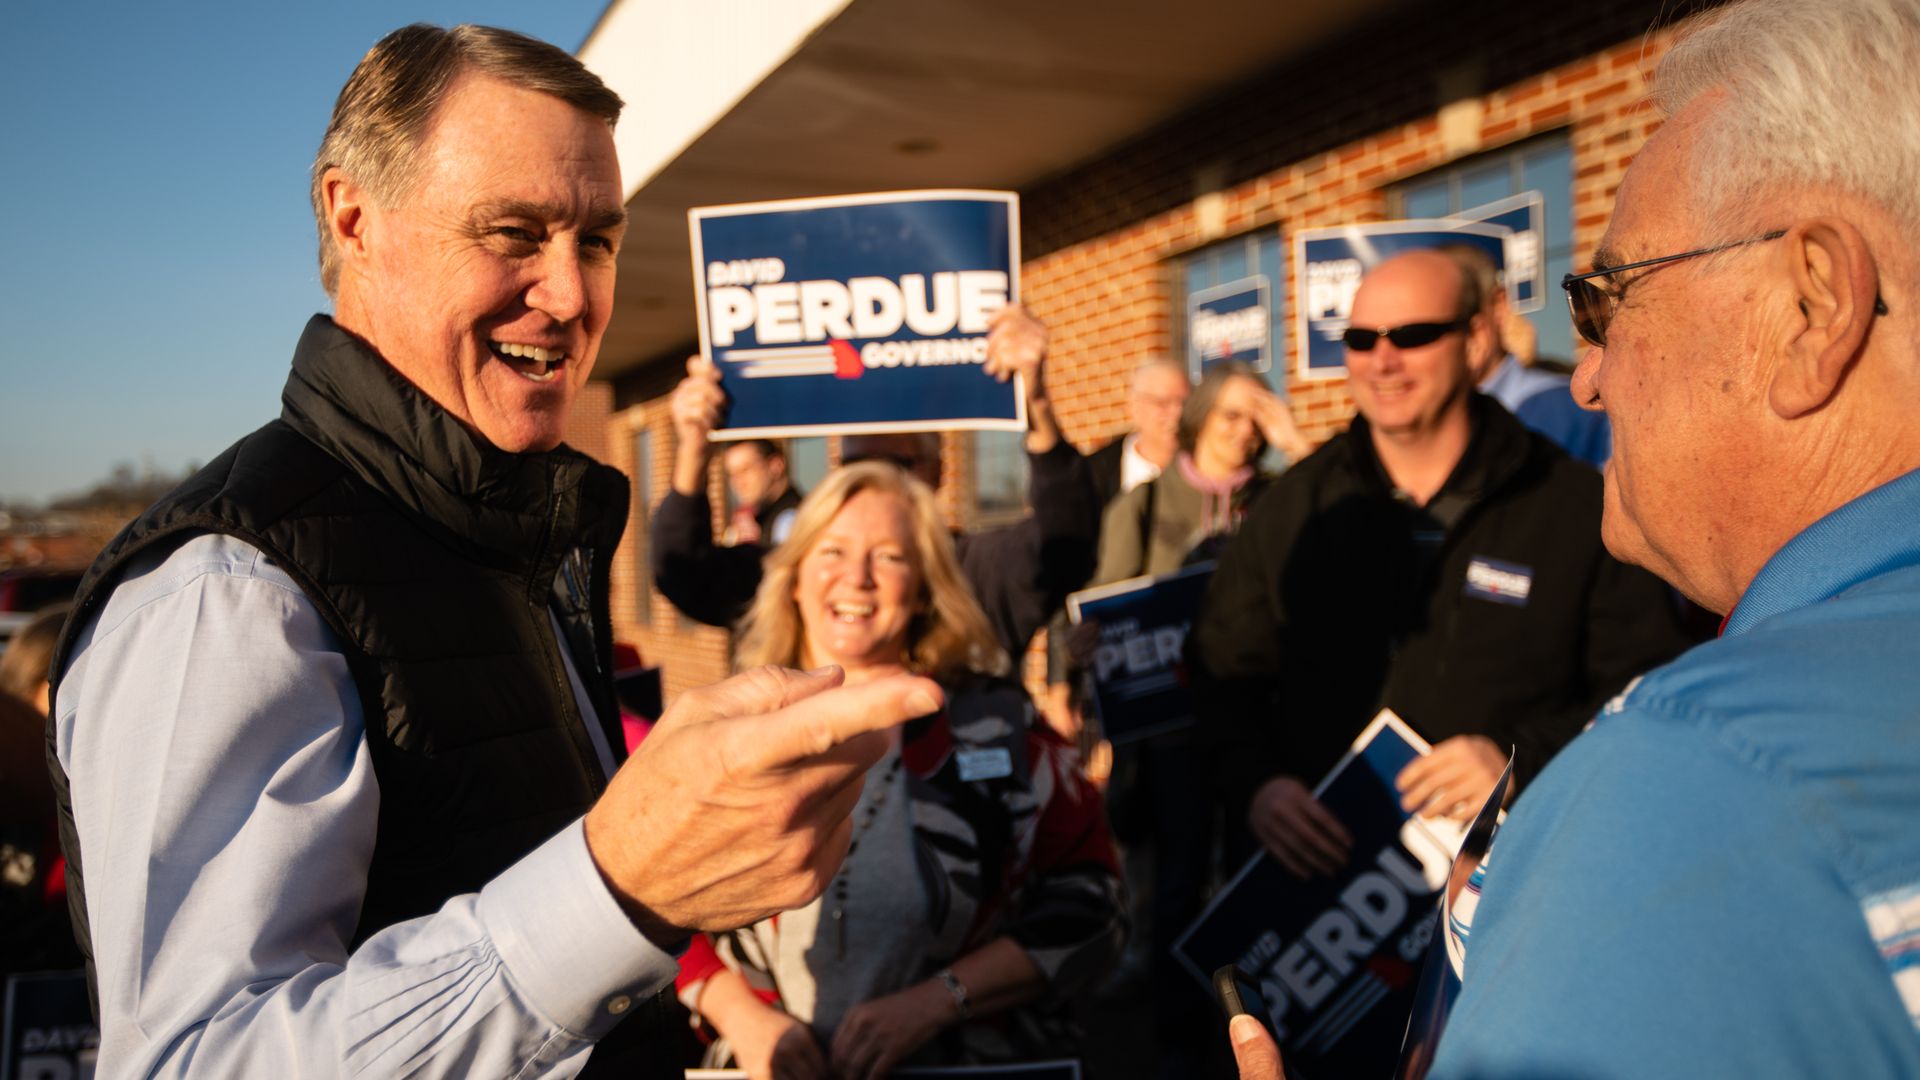 David Perdue pointing and smiling 